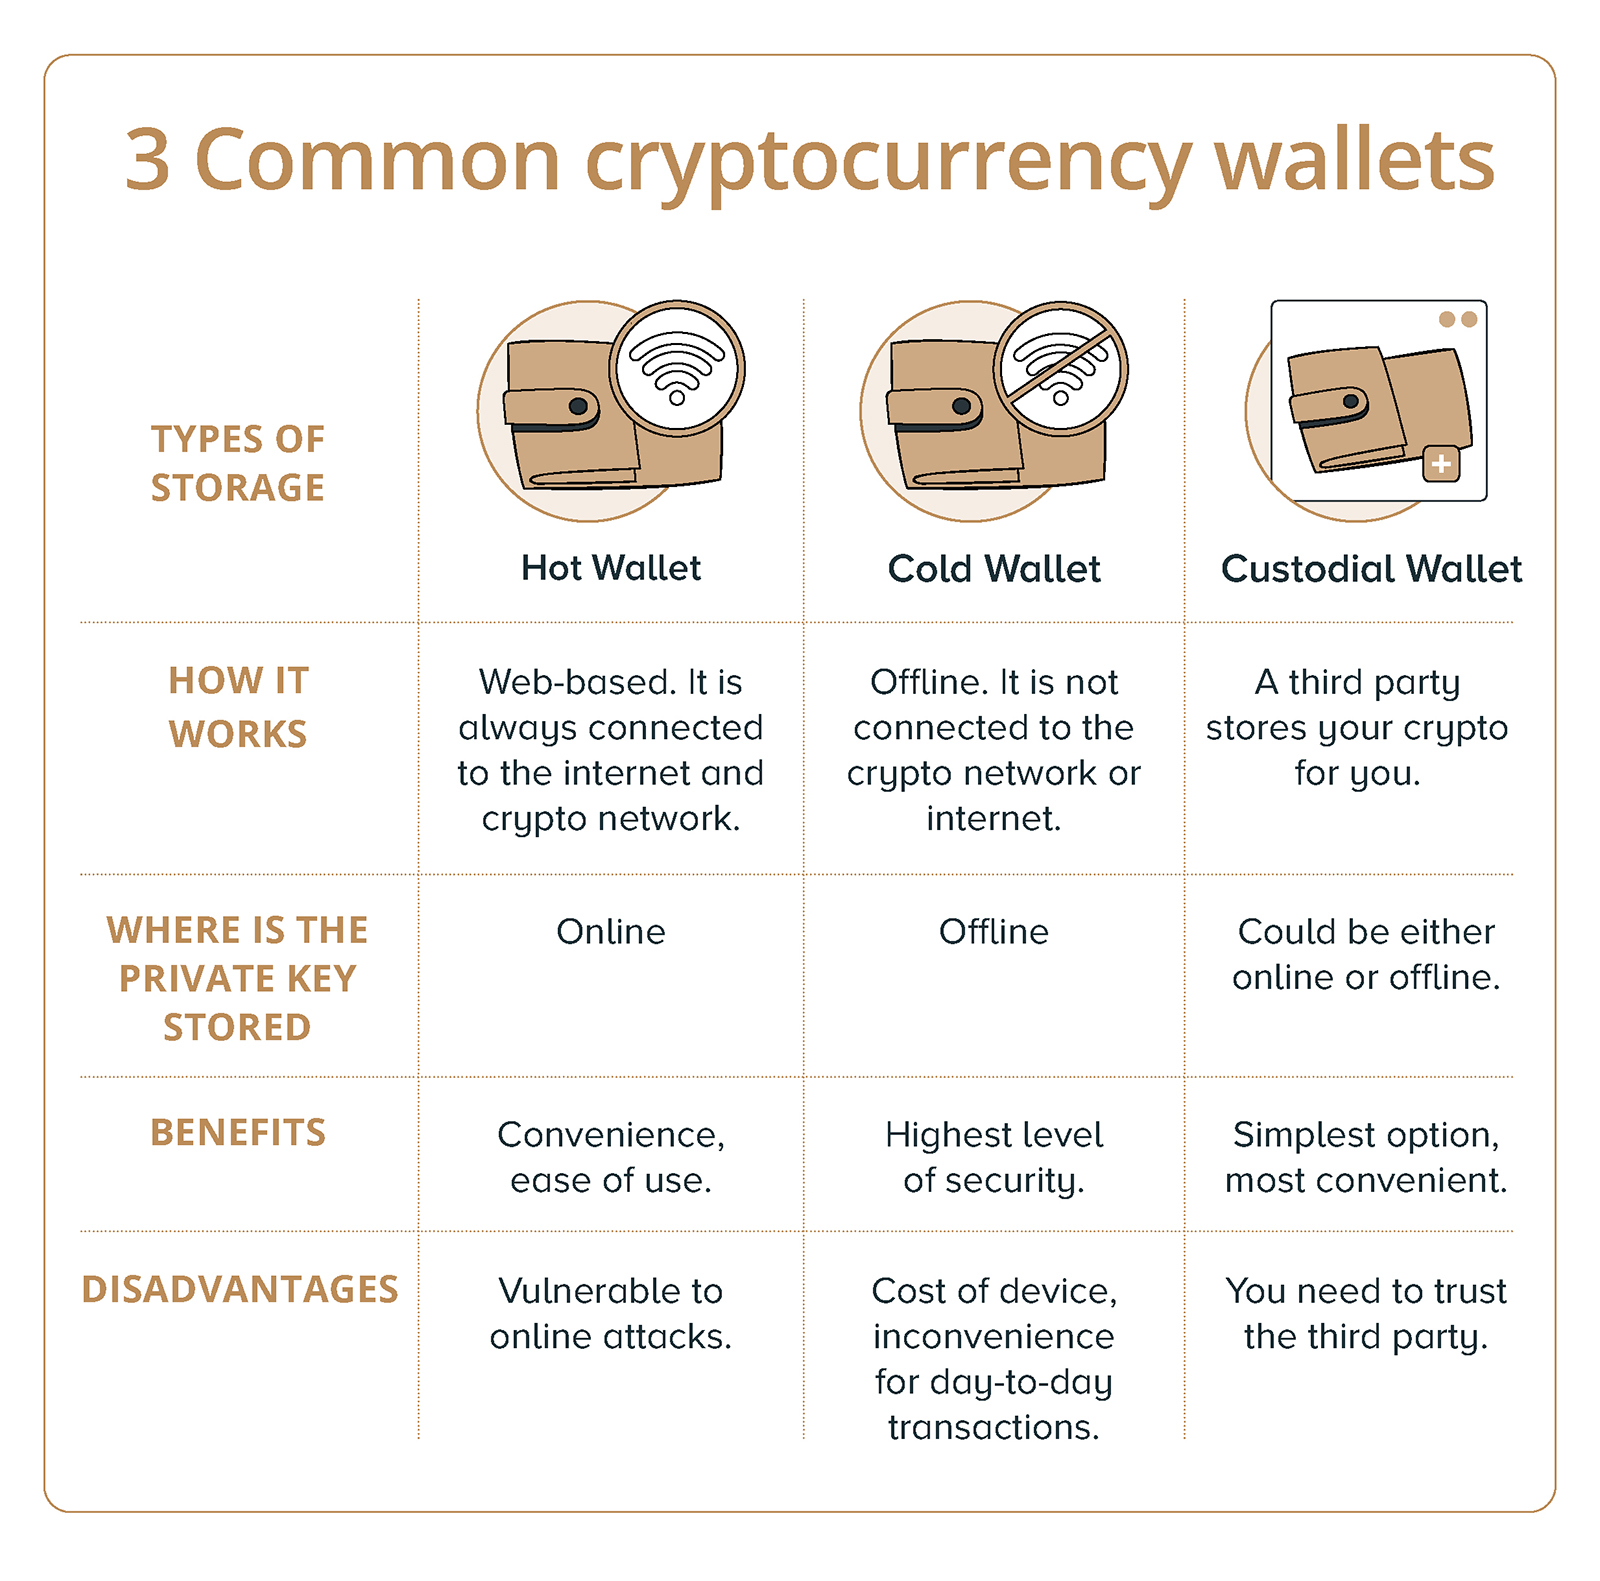 Common cryptocurrency wallets are: Hot wallets, cold wallets, custodial wallets.